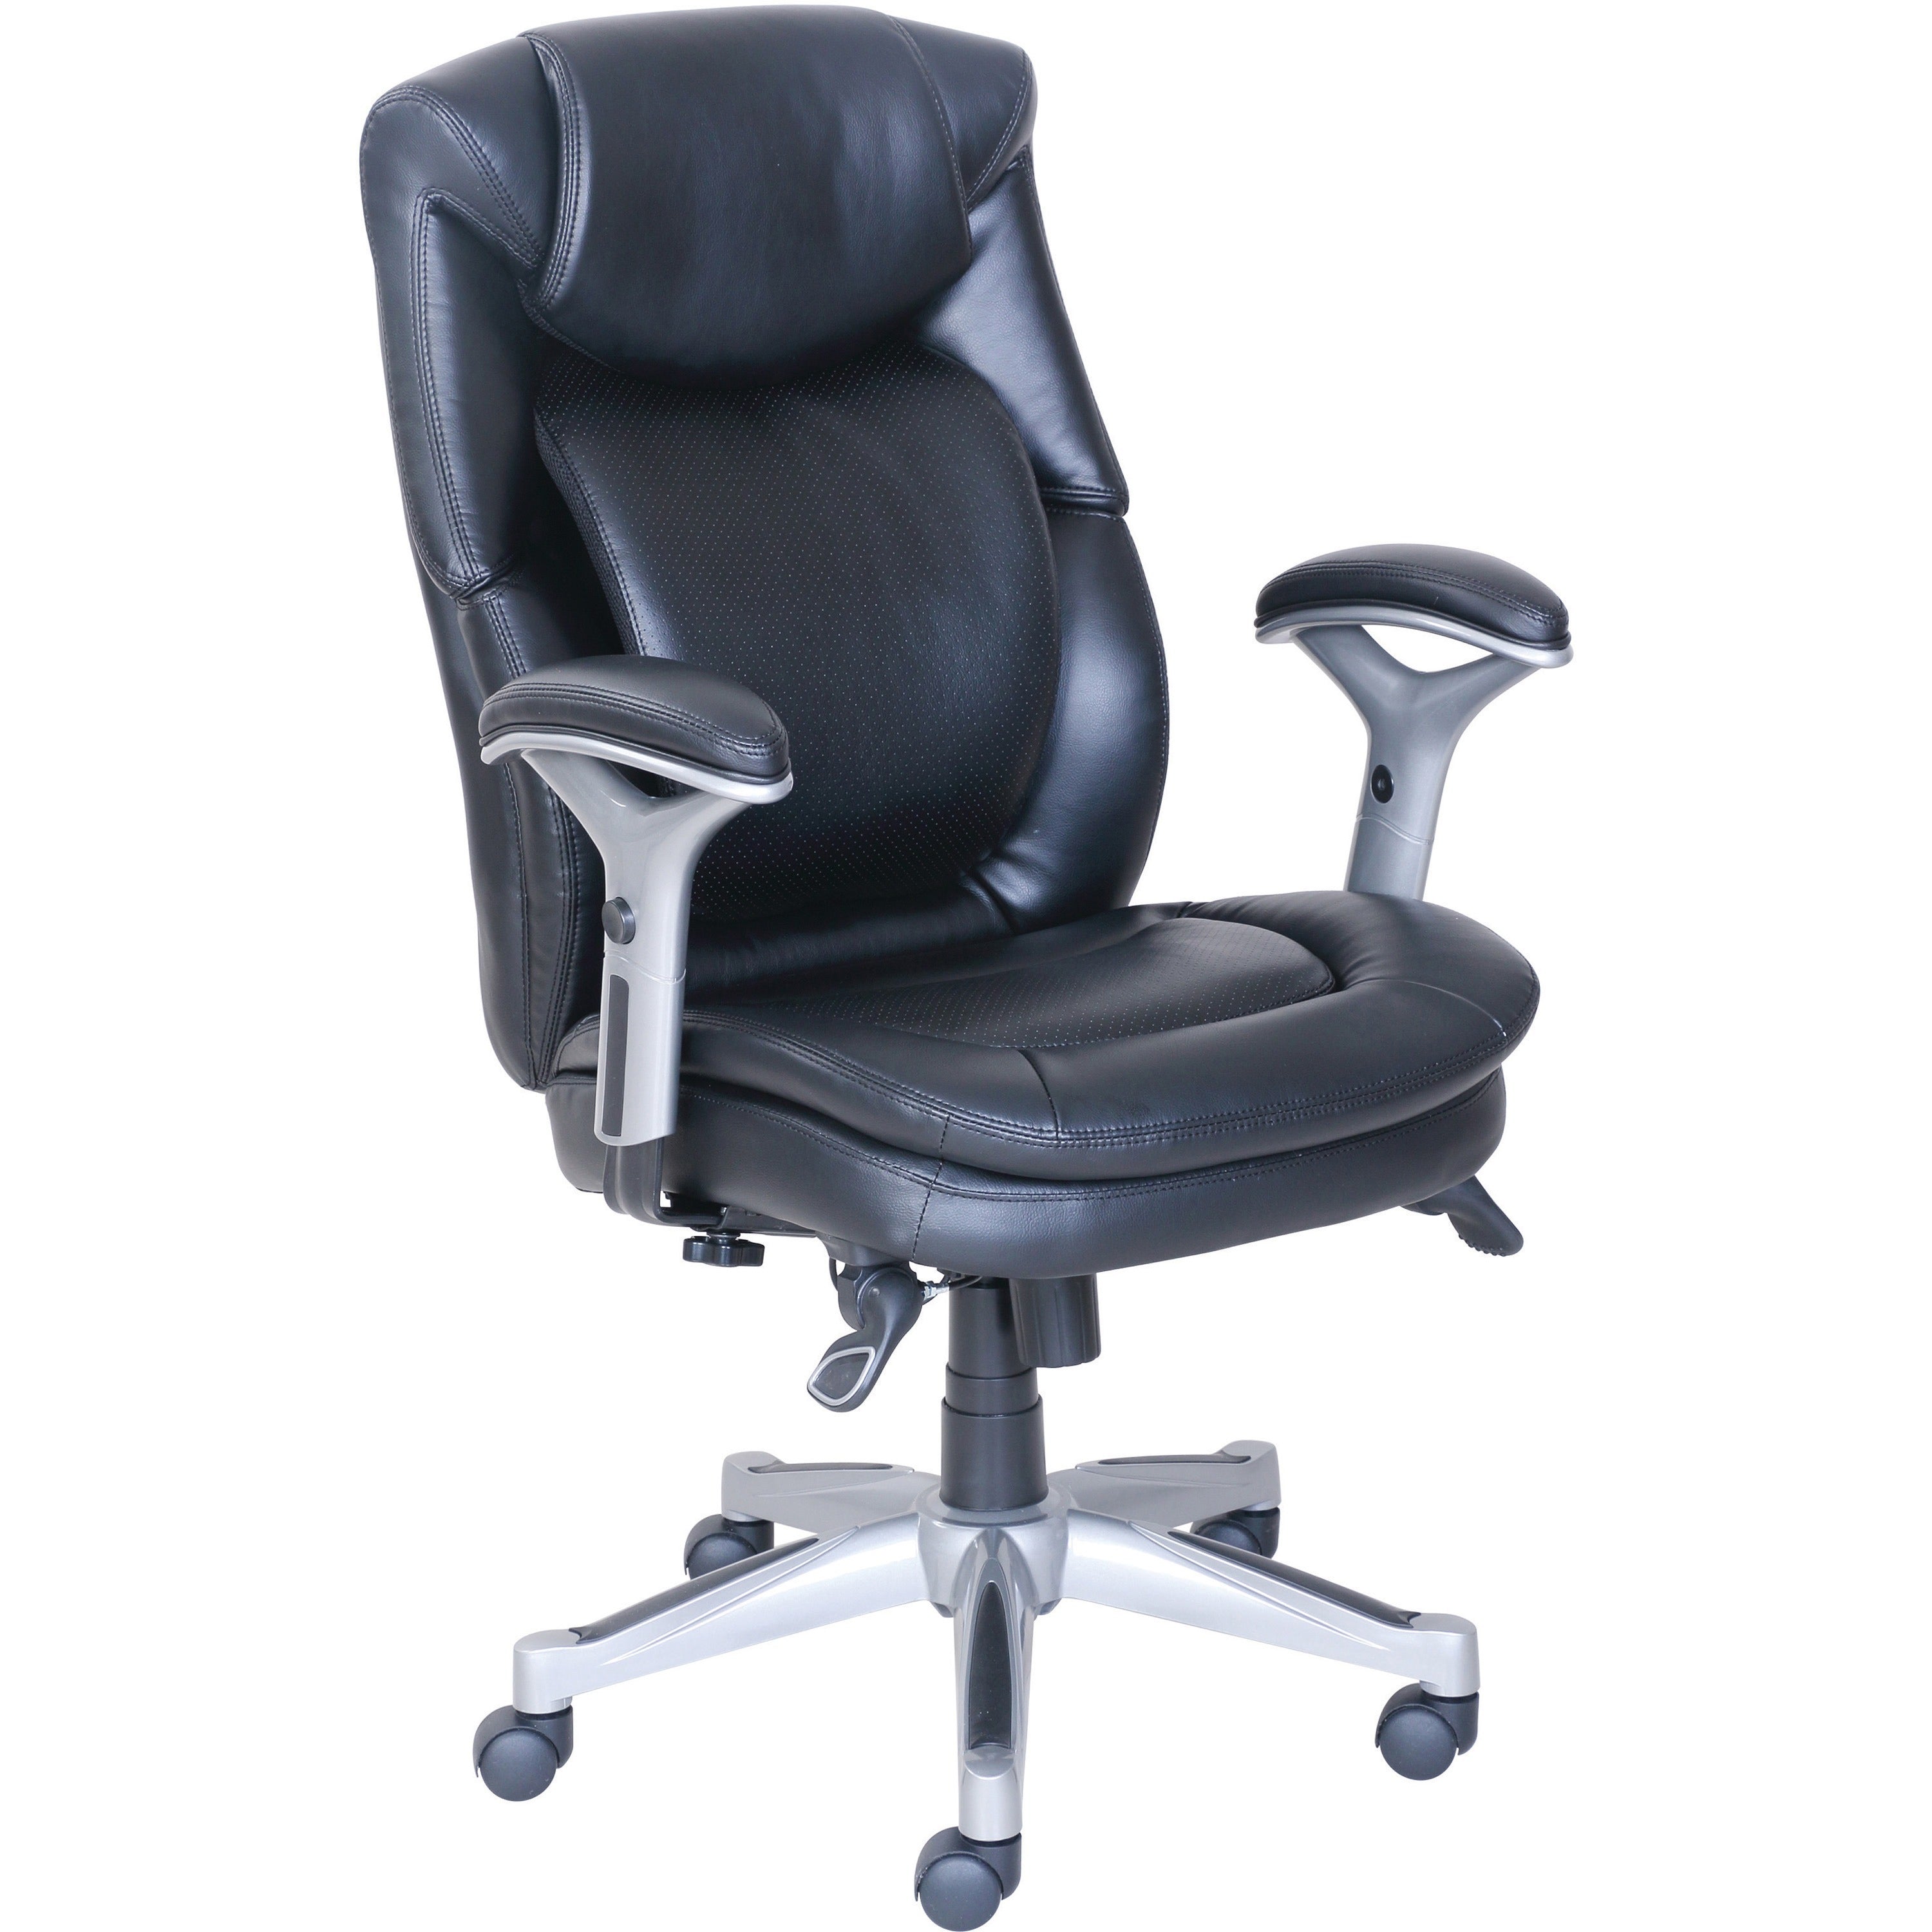 lorell-wellness-by-design-executive-office-chair-black-bonded-leather-seat-black-bonded-leather-back-high-back-5-star-base-armrest-1-each_llr47920 - 1